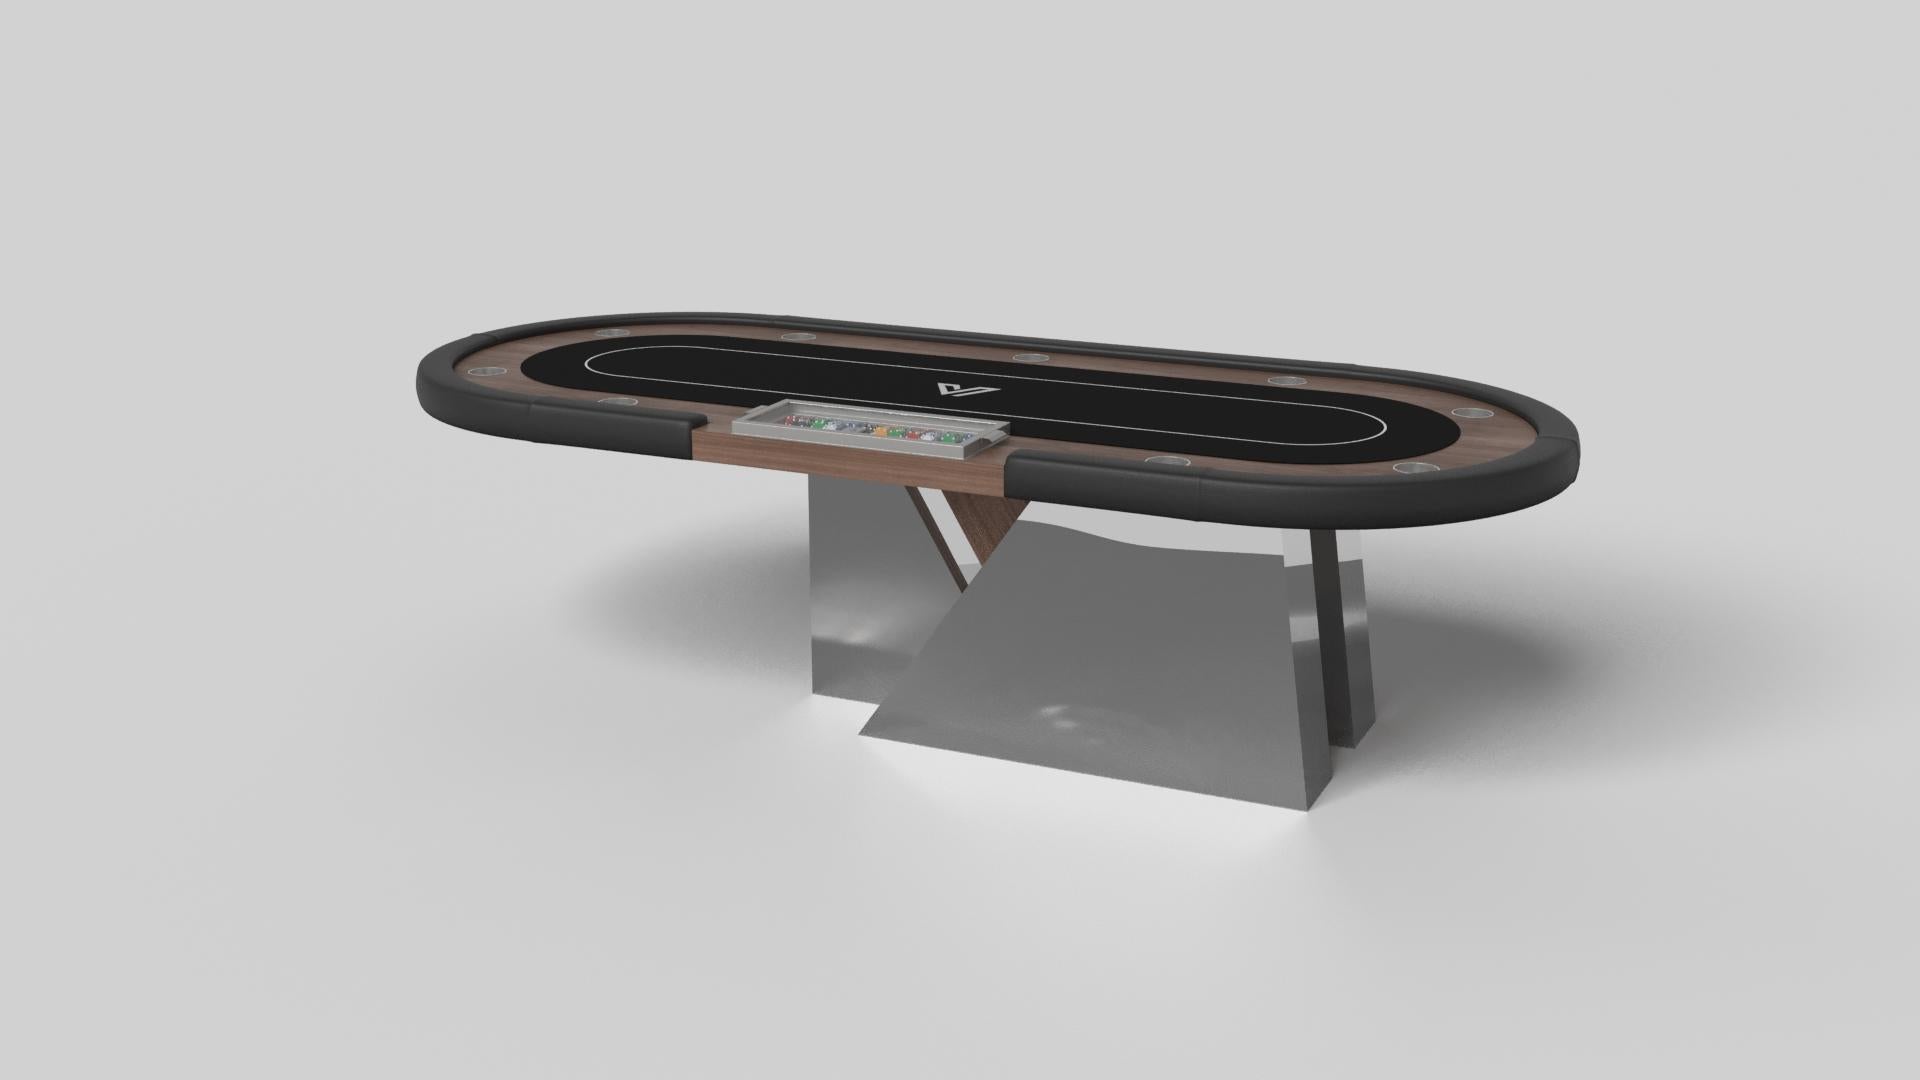 An asymmetric base creates a free-floating silhouette, making the Stilt poker table in chrome with walnut a compelling, contemporary addition to the modern home. Crafted from durable metal with solid walnut wood accents, this luxury handcrafted game